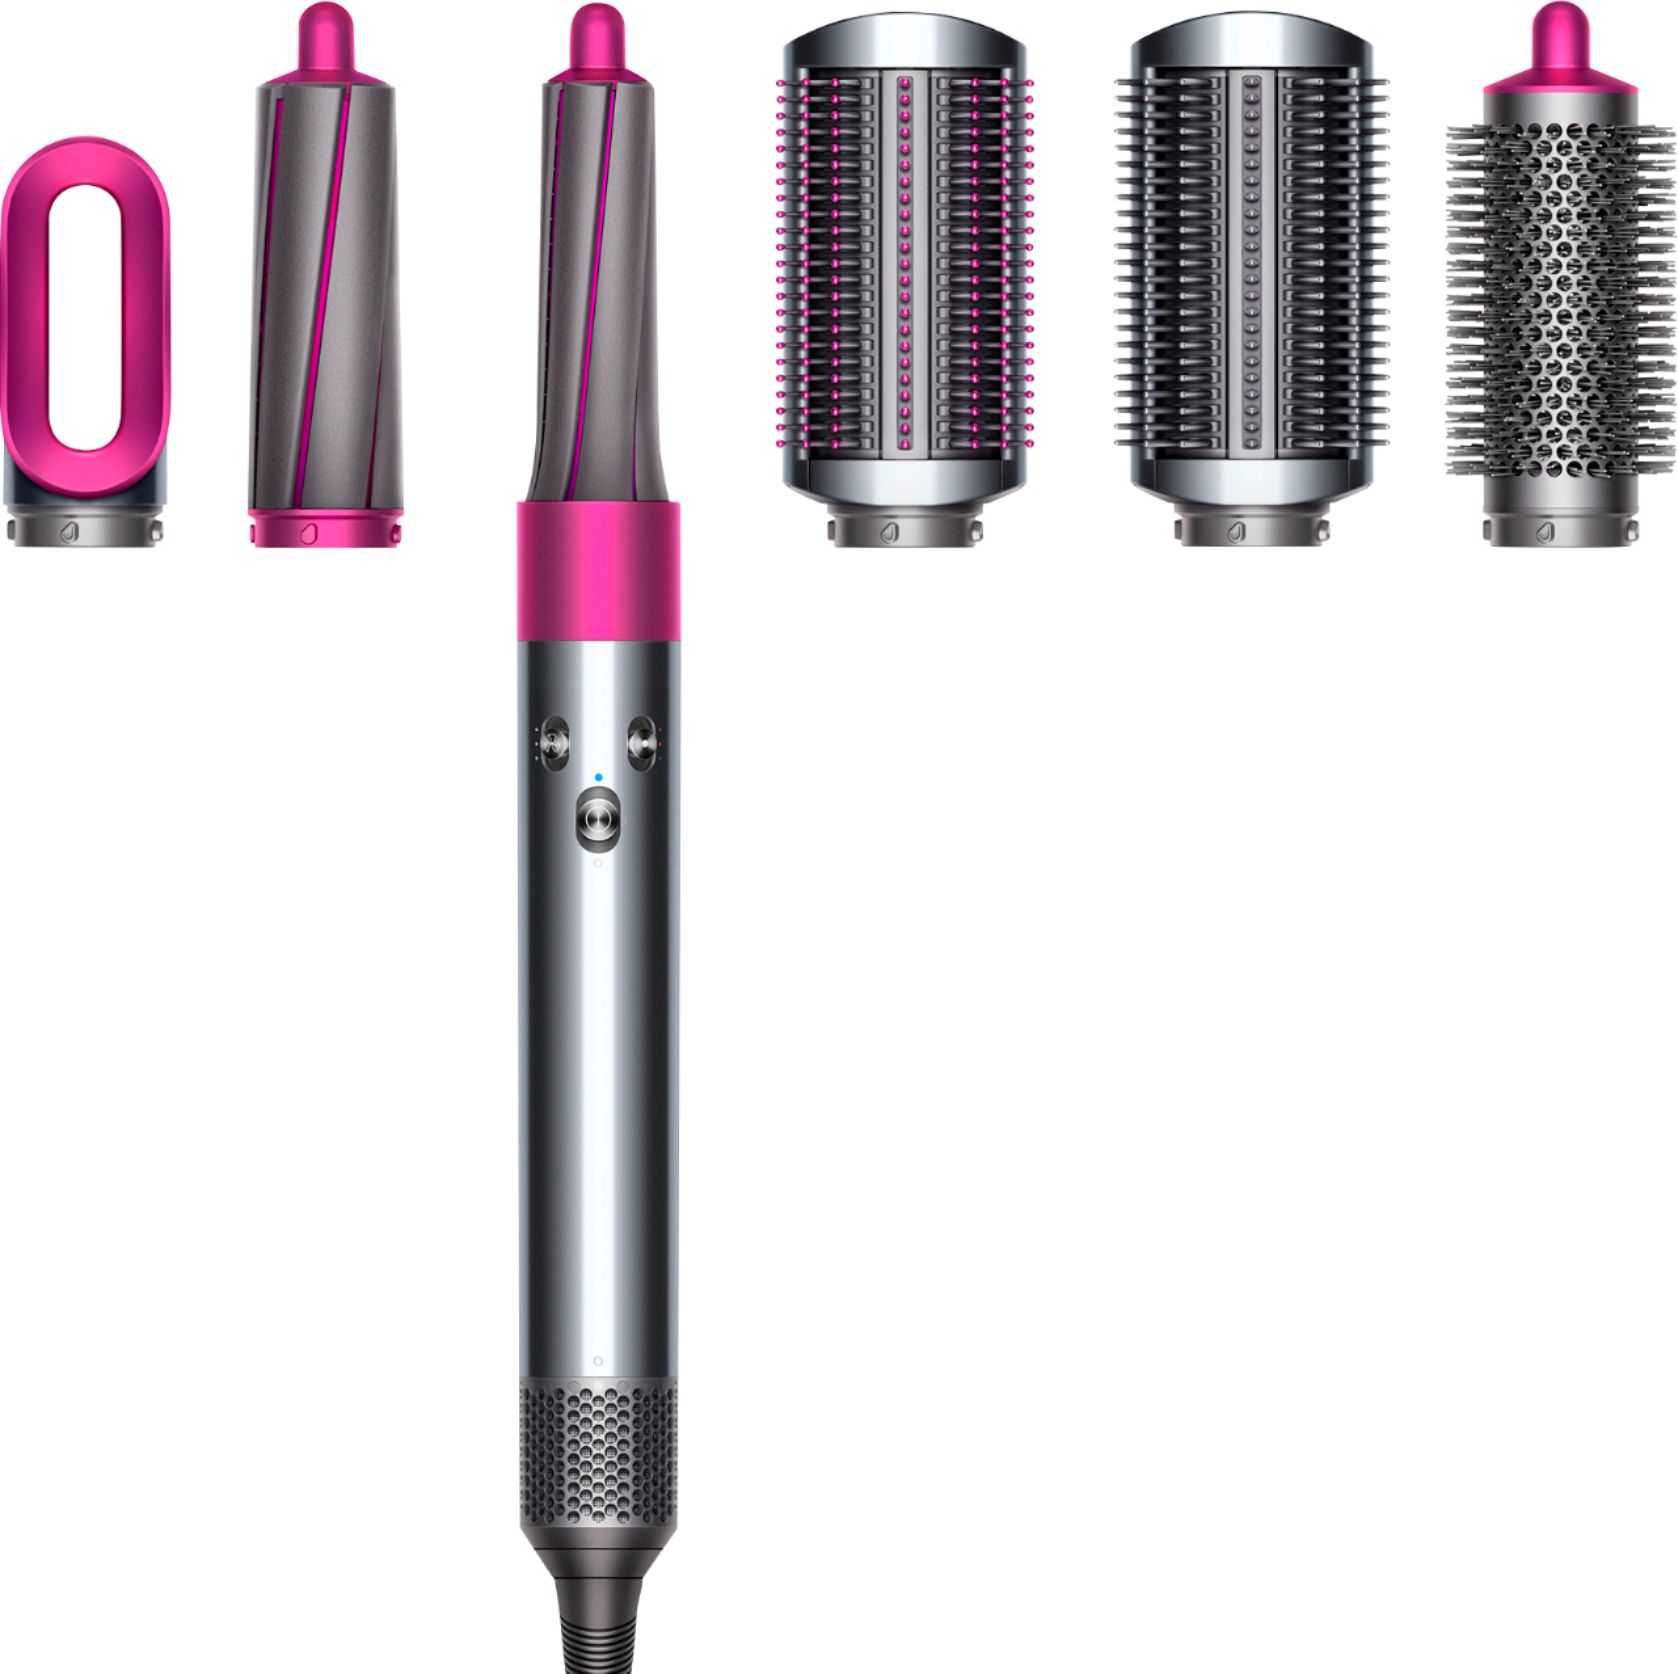 Dyson Complete Styler for multiple hair types and styles Fuchsia, Nickel 310731-01 - Best Buy